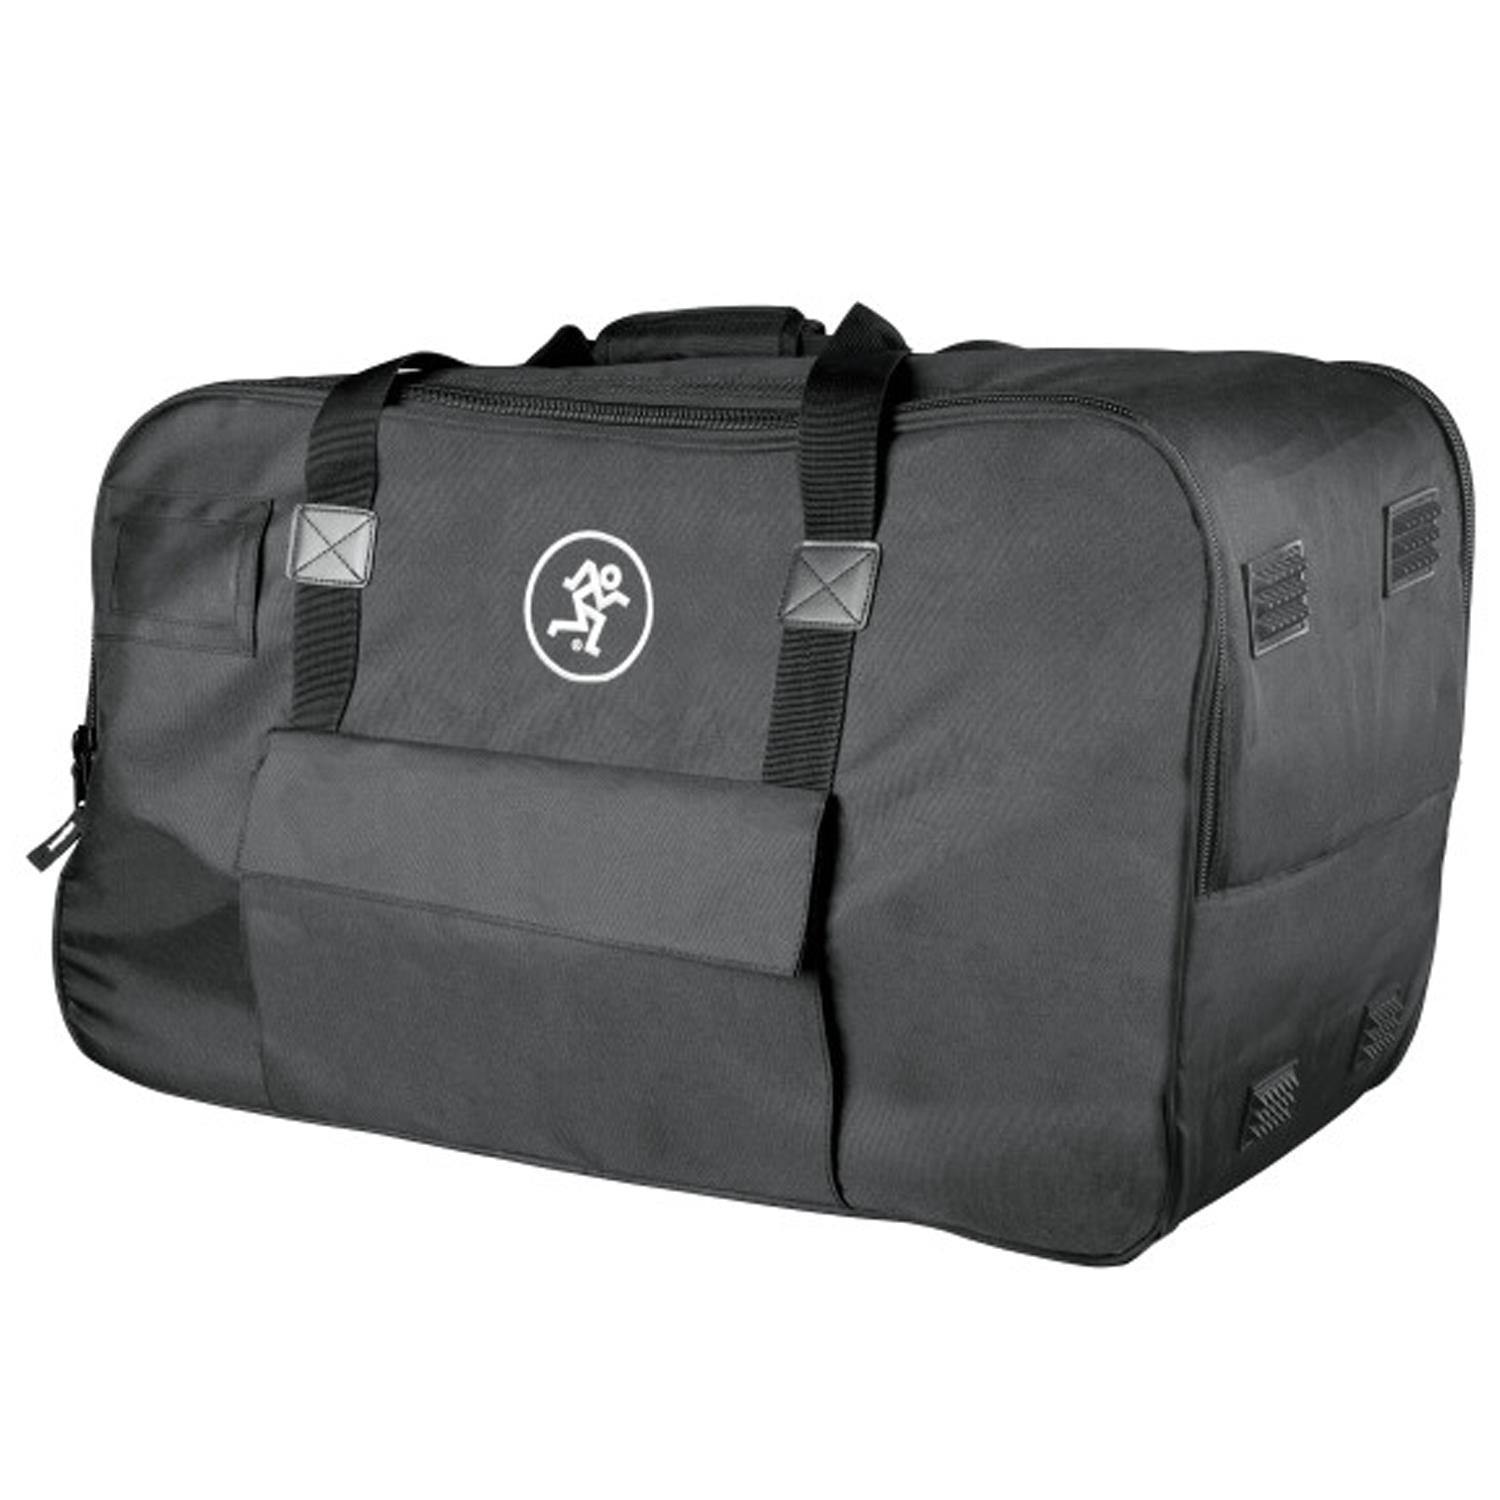 Mackie Padded Carry Bag for Thump 12" Models Thump212, Thump212XT, Thump12A, Thump12BST - DY Pro Audio